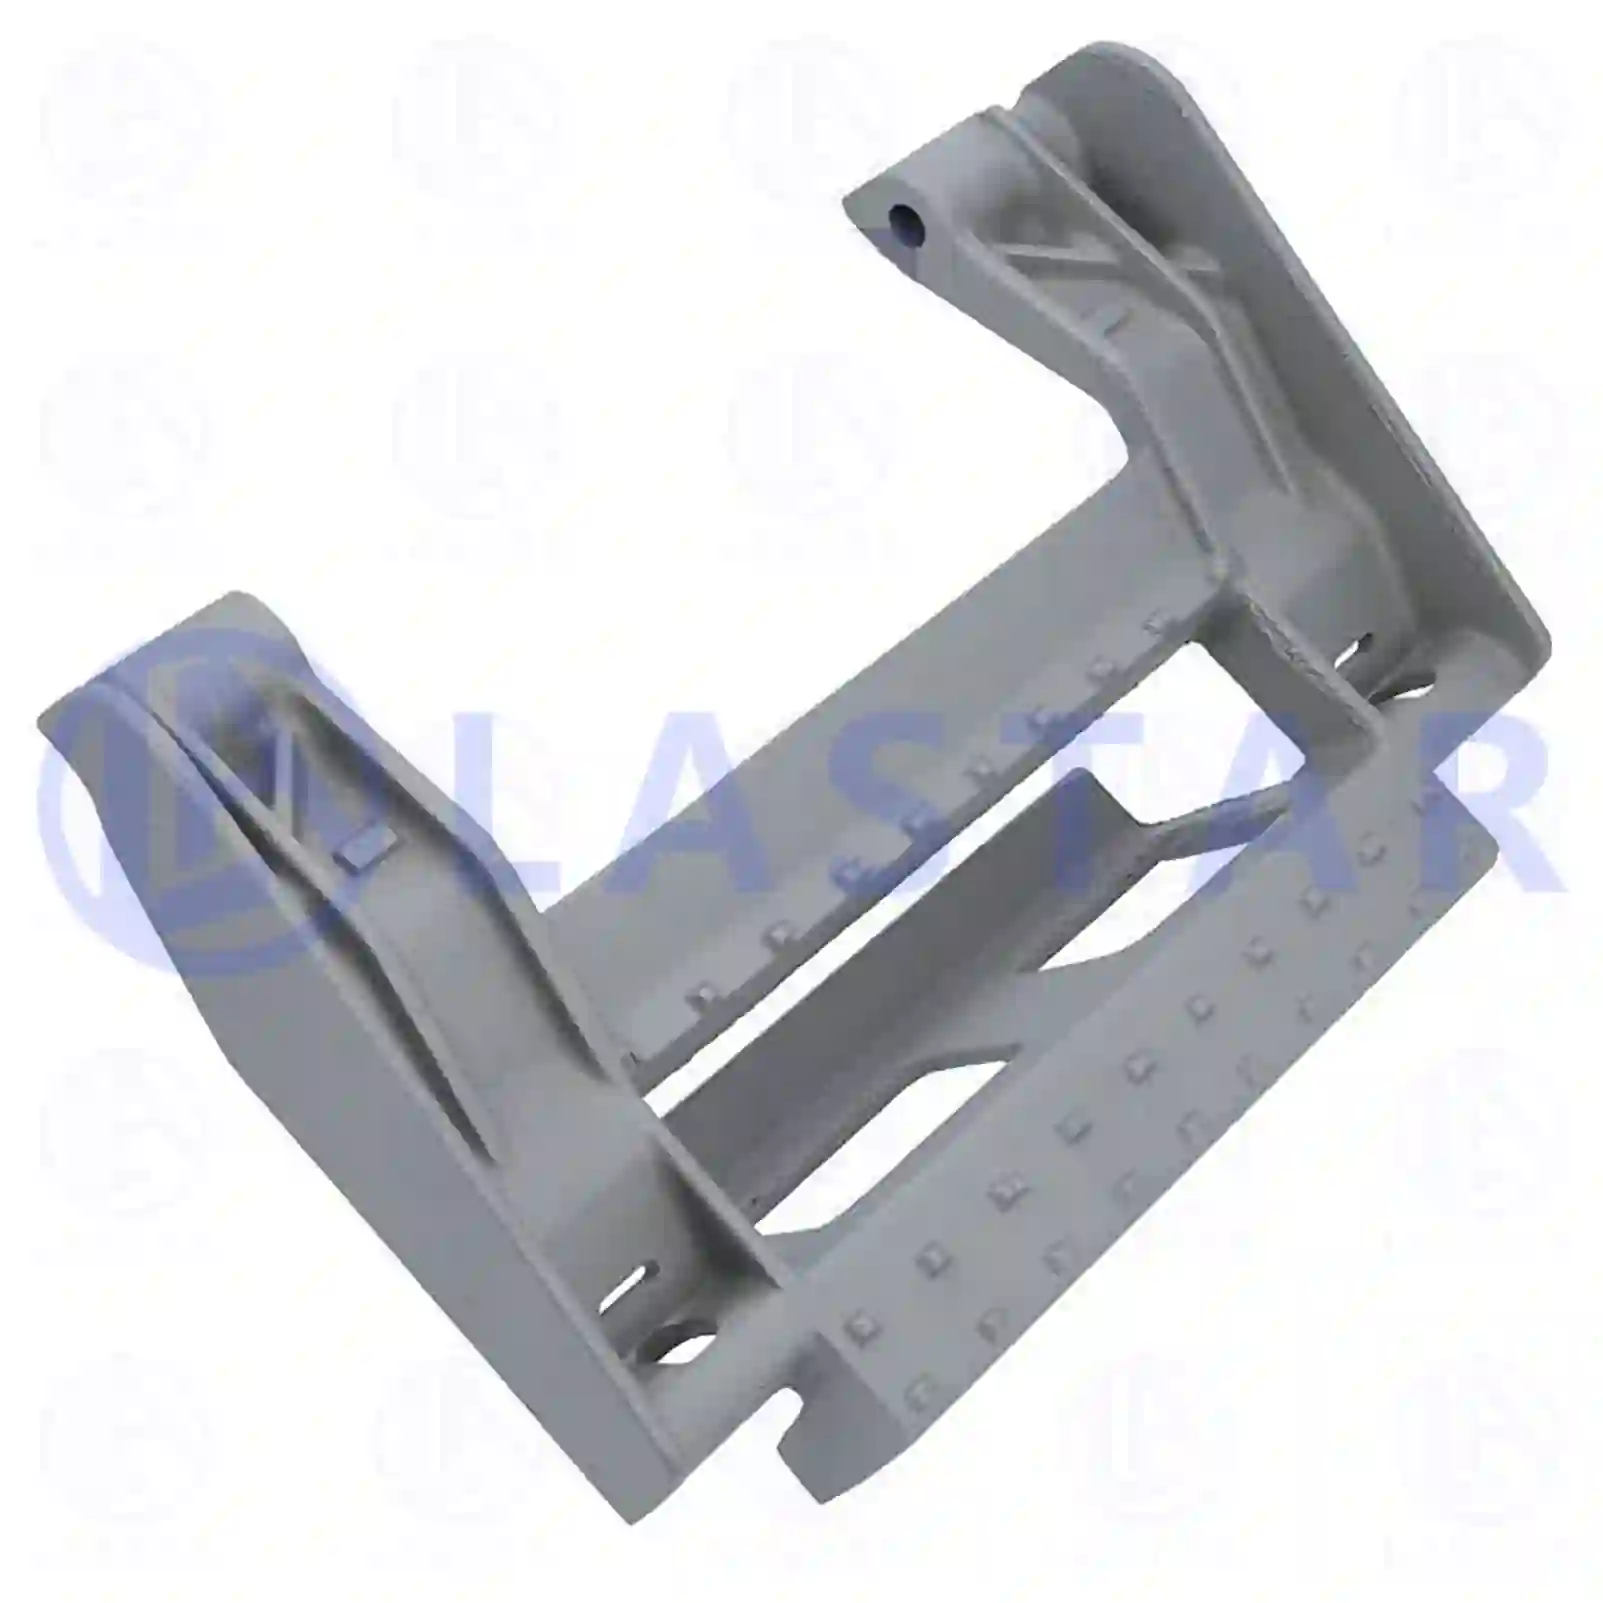 Hinge, front grill, 77719749, 1336468, 1672838 ||  77719749 Lastar Spare Part | Truck Spare Parts, Auotomotive Spare Parts Hinge, front grill, 77719749, 1336468, 1672838 ||  77719749 Lastar Spare Part | Truck Spare Parts, Auotomotive Spare Parts